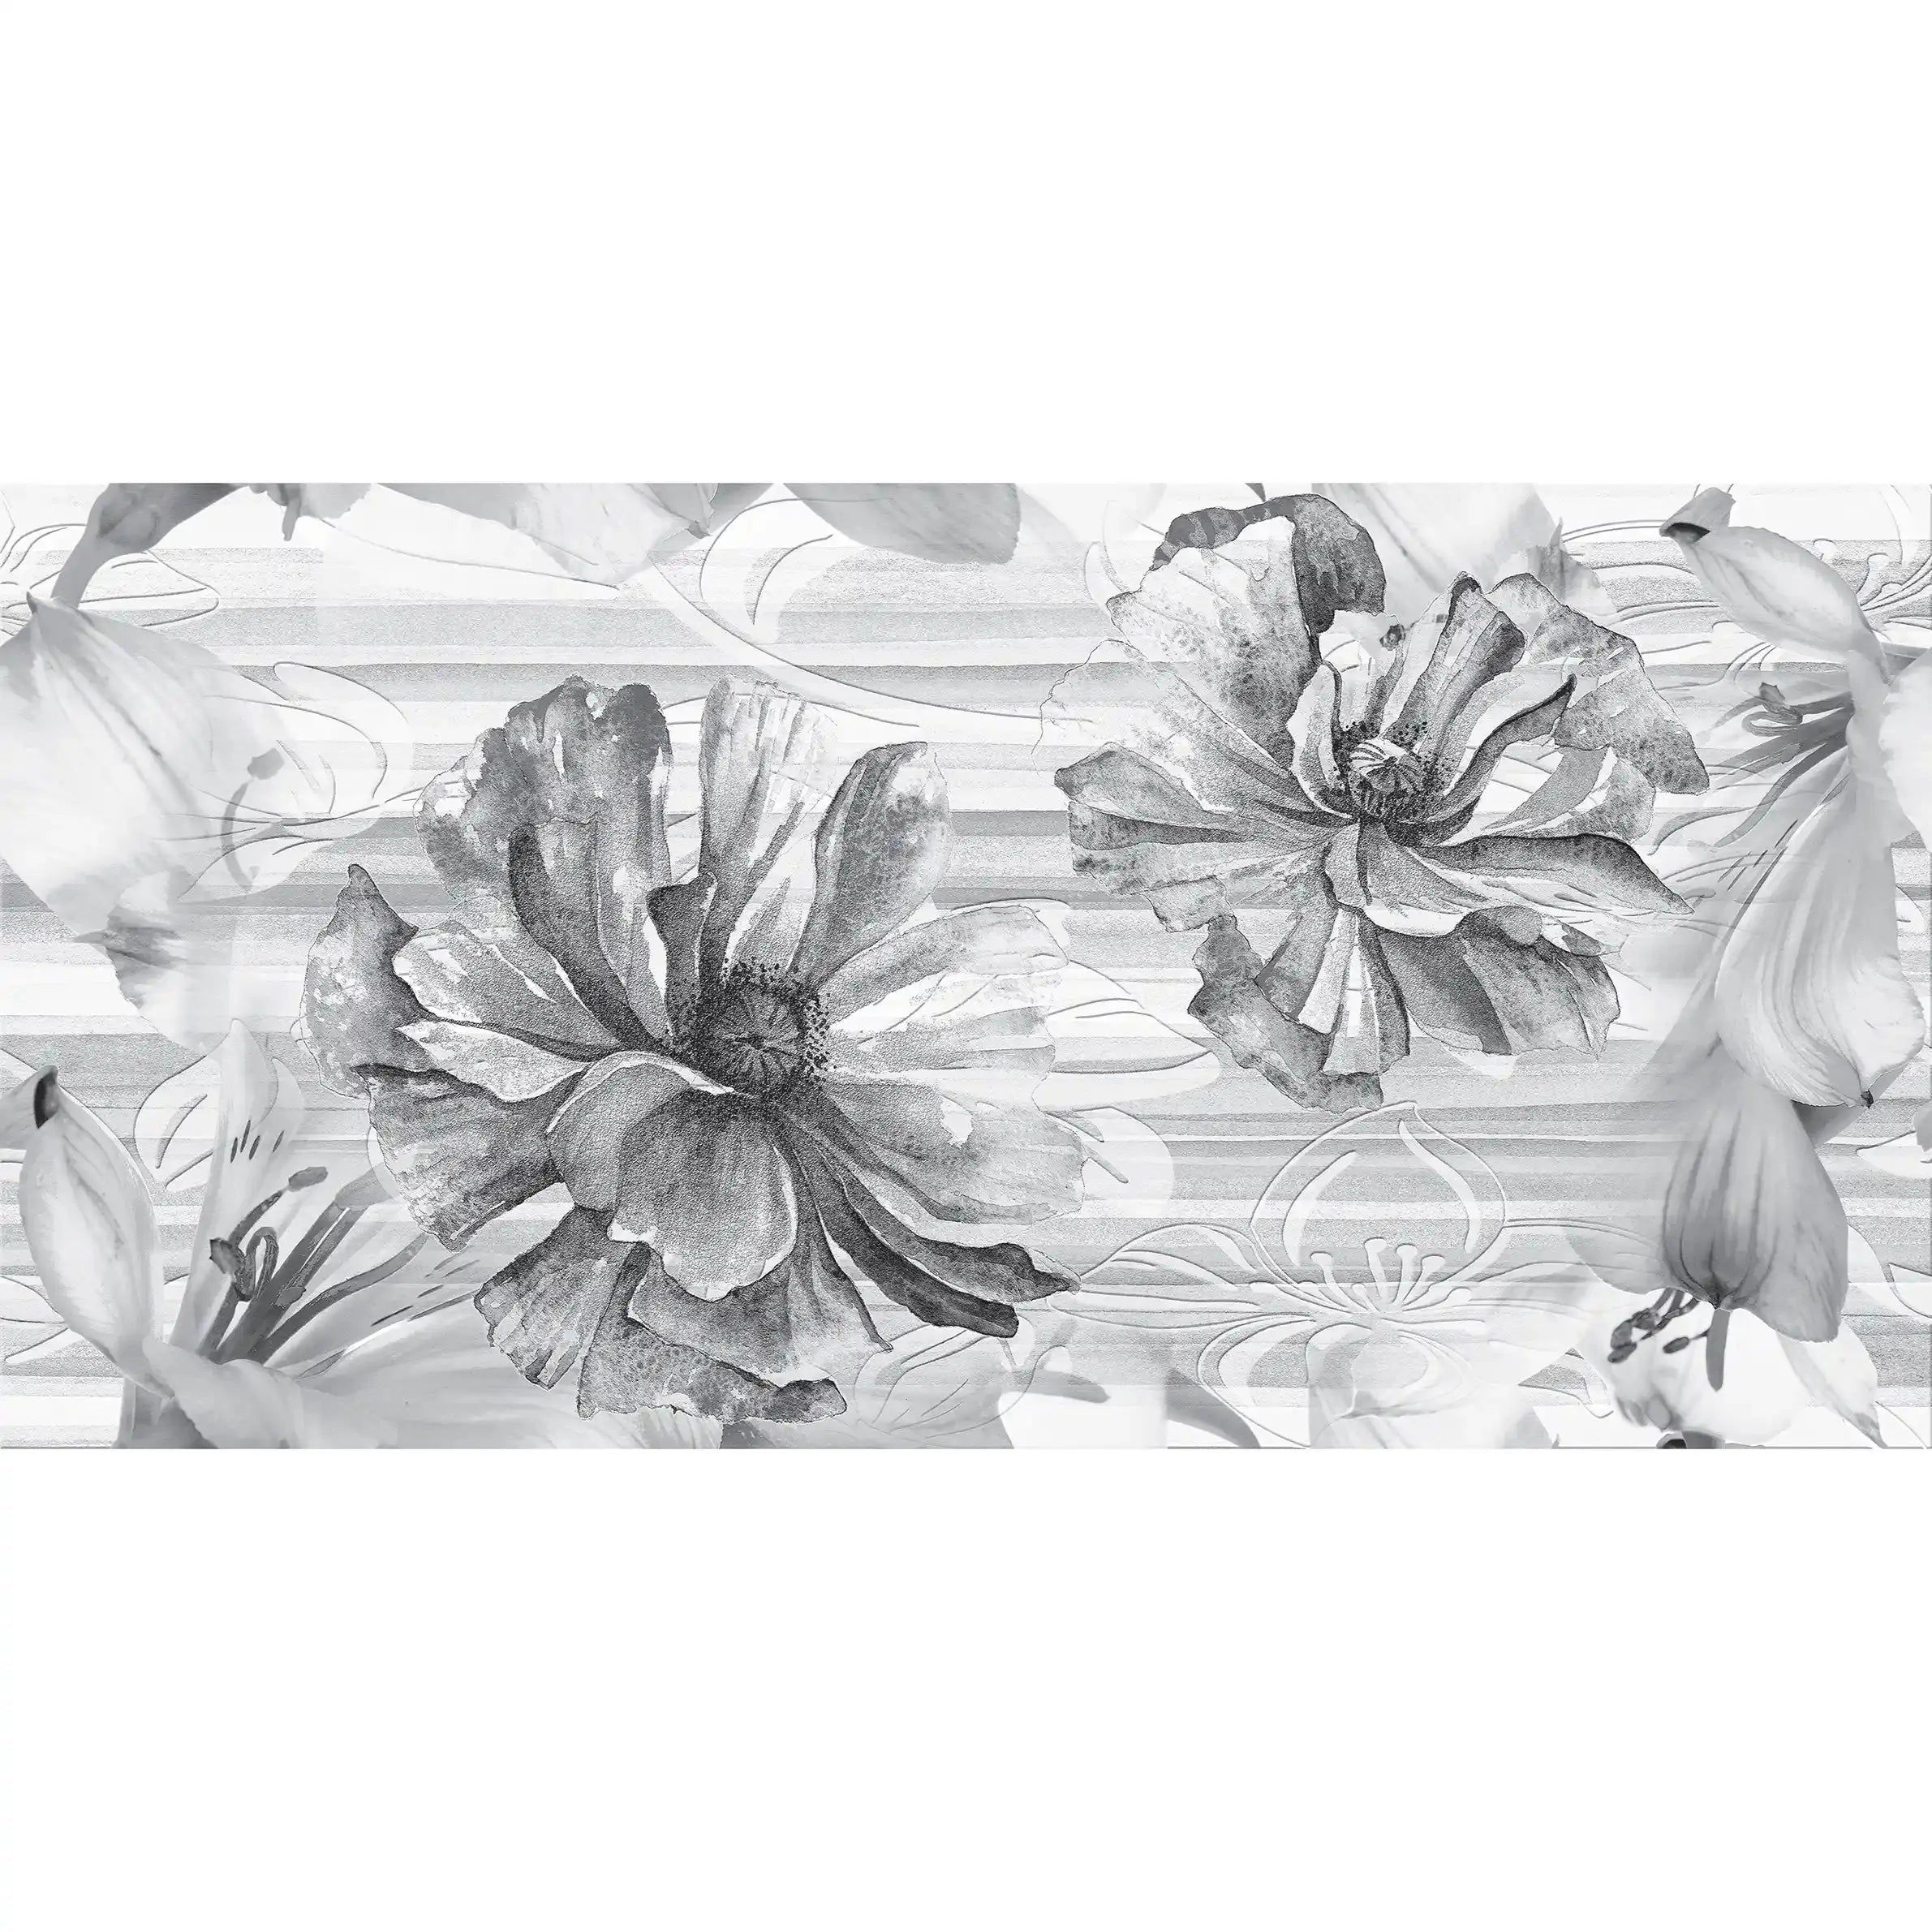 3011-E / Tropical Wallpaper - Watercolor Floral Pattern Peel and Stick Mural for Kitchen and Bathroom - Artevella